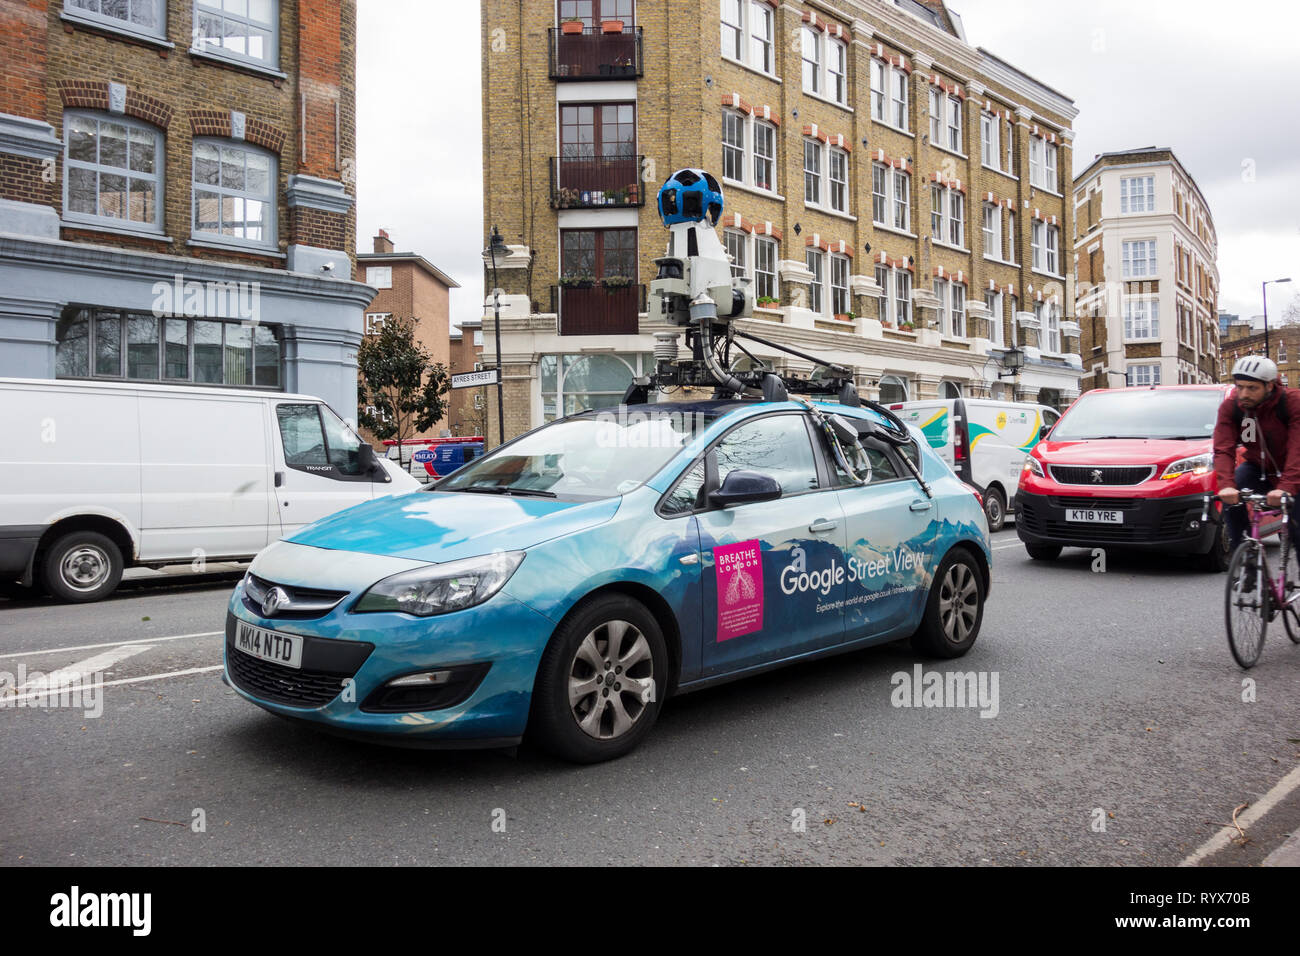 Google Street View car and 360-degree camera in south east London, England, U.K. Stock Photo